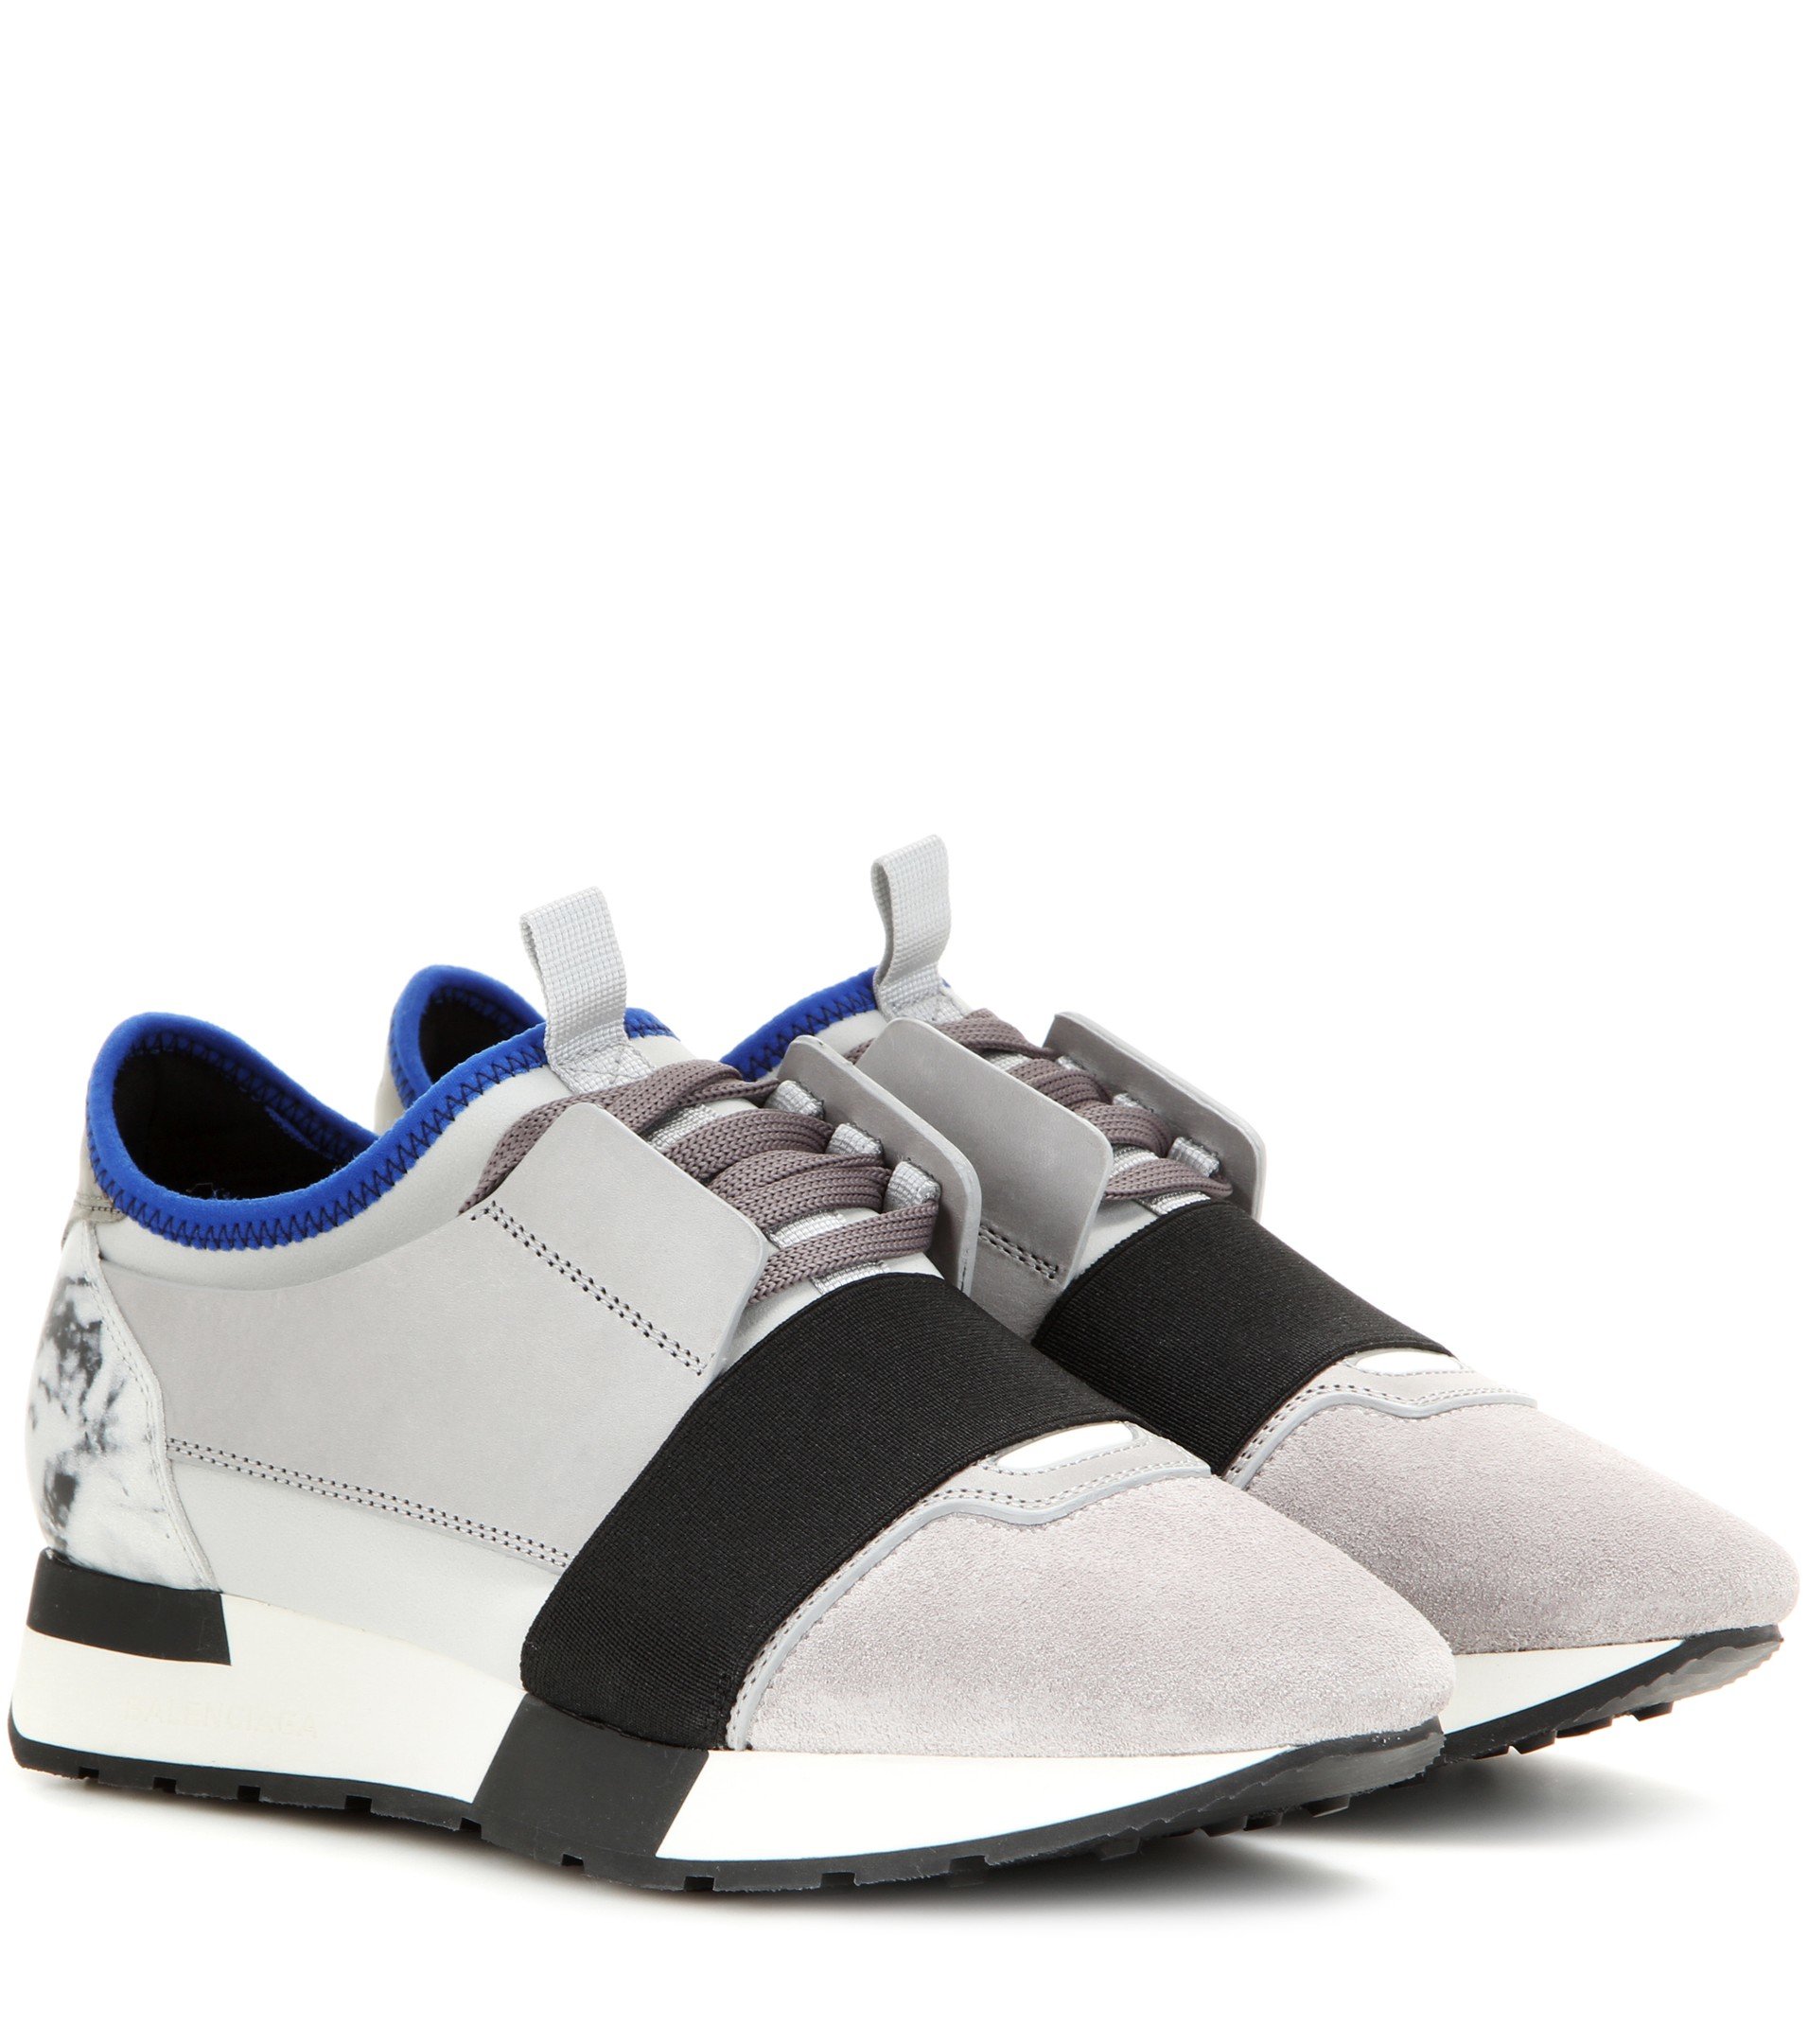 Lyst - Balenciaga Race Runner Fabric, Leather And Suede Sneakers